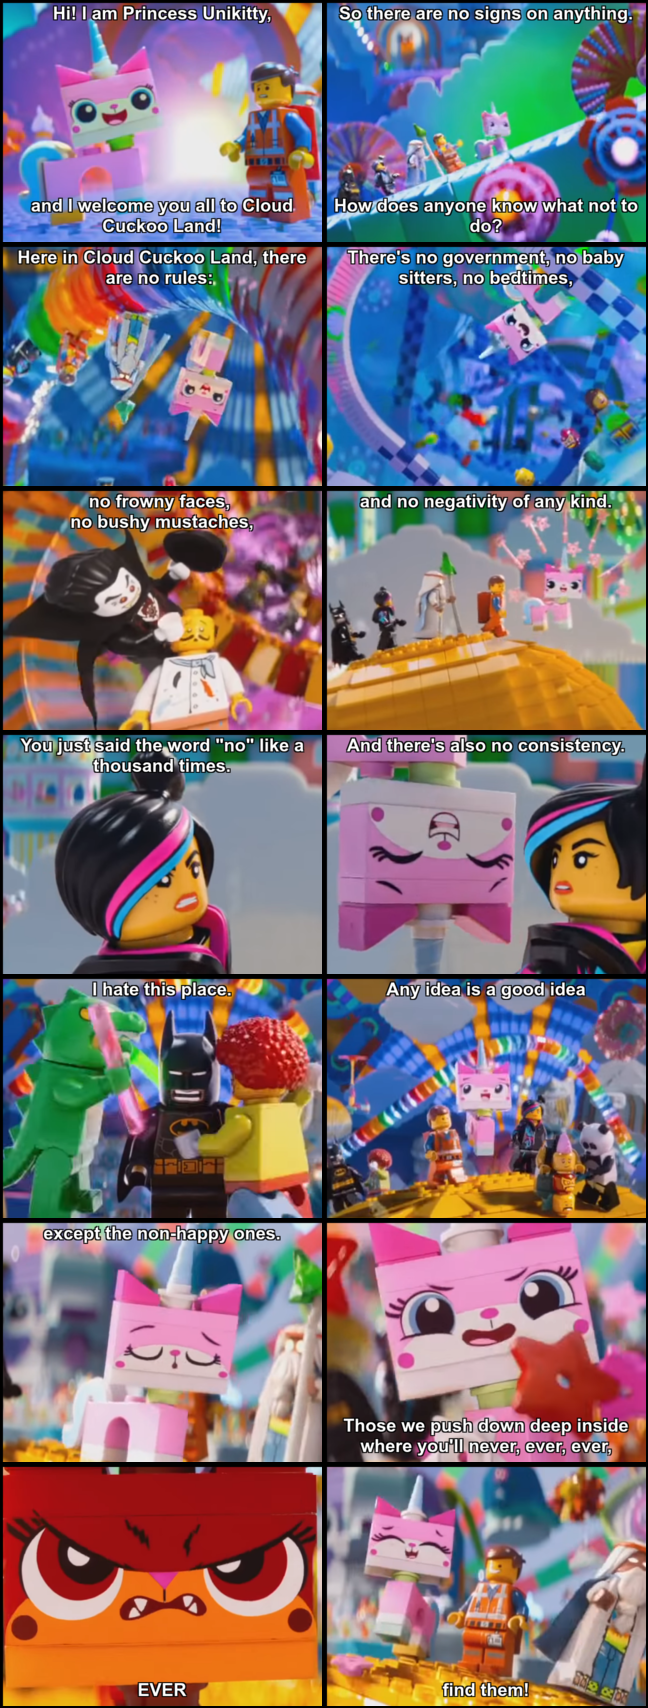 Excerpt from LEGO Movie: Unikitty: Hi! I am Princess Unikitty, and I welcome you all to Cloud Cuckoo Land! Emmet: So there are no signs on anything. How does anyone know what not to do? Unikitty: Here in Cloud Cuckoo Land, there are no rules: There's no government, no baby sitters, no bedtimes, no frowny faces, no bushy mustaches, and no negativity of any kind. Lucy: You just said the word "no" like a thousand times. Unikitty: And there's also no consistency. Batman: [the clown and the lizard man are dancing around him] I hate this place. Unikitty: Any idea is a good idea except the non-happy ones. Those we push down deep inside where you'll never, ever, ever, EVER find them!